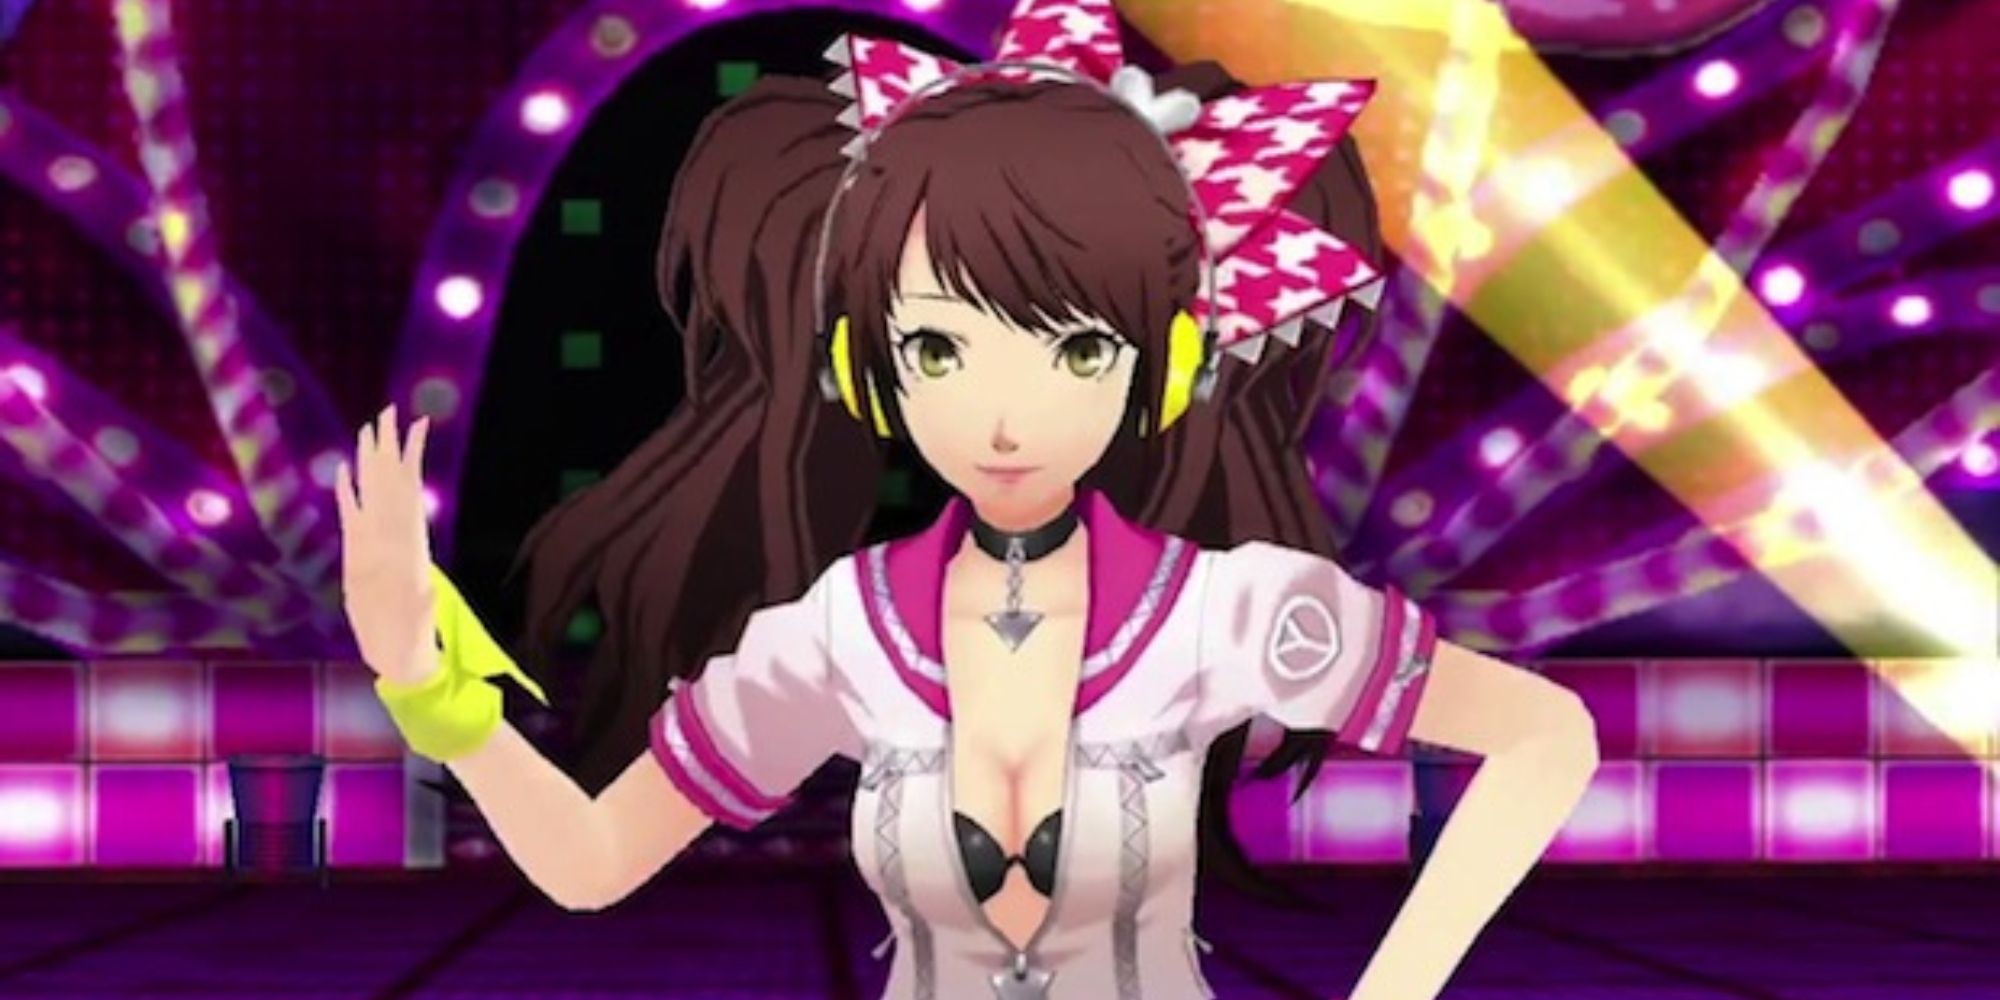 a shot of Rise Kujikawa from Persona 4 Dancing All Night with headphones on against a purple background